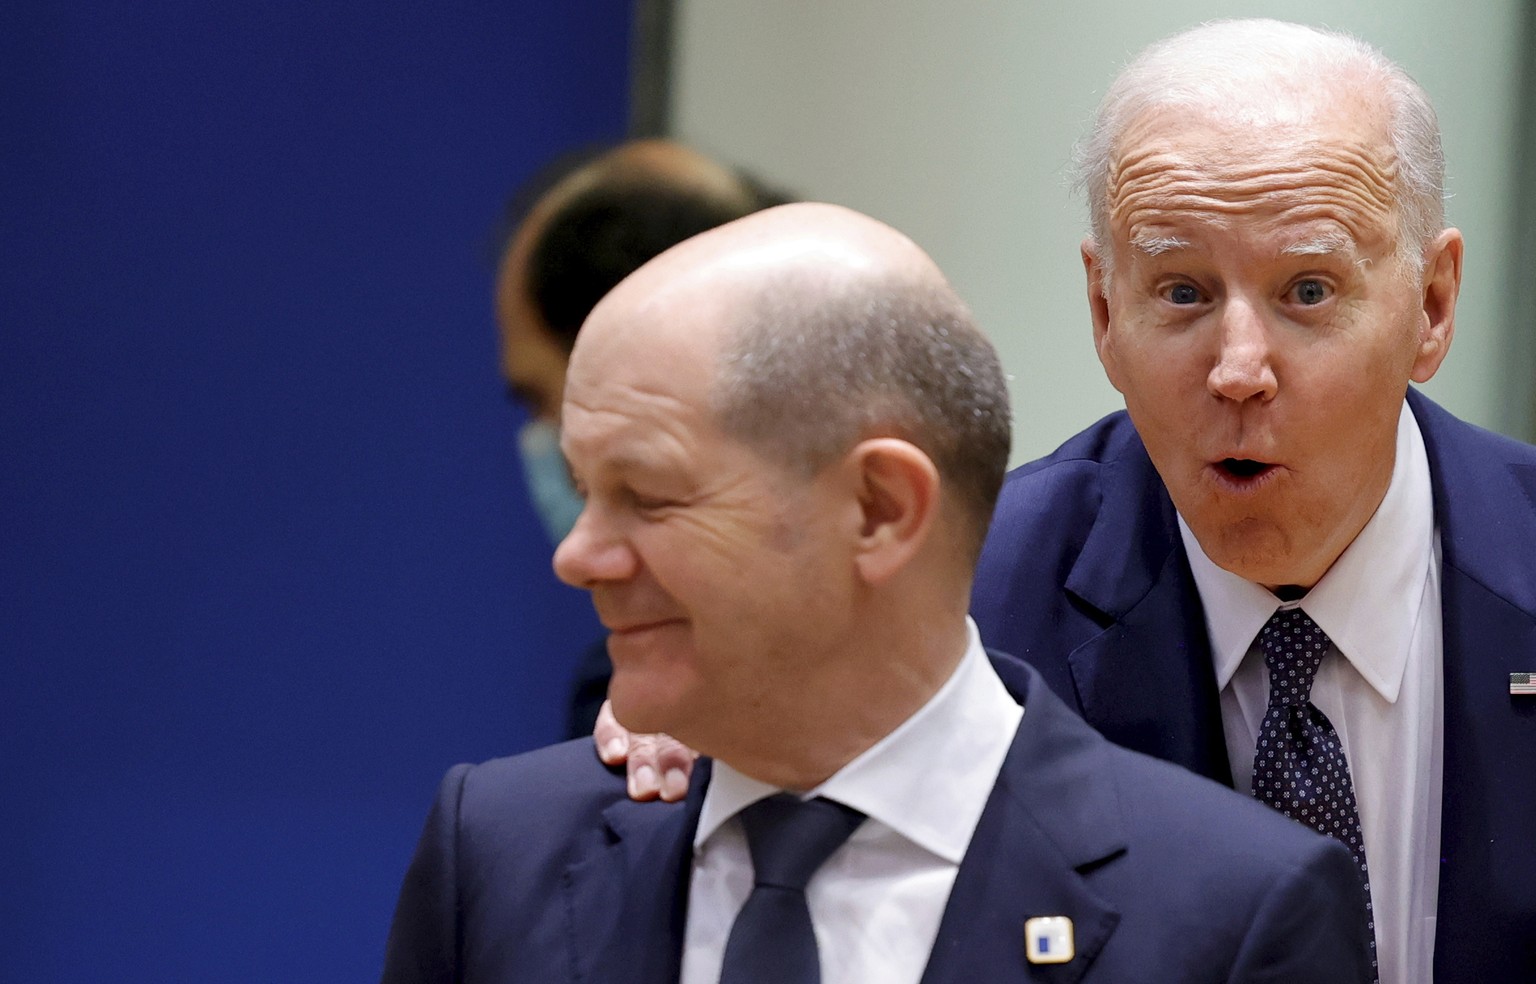 U.S. President Joe Biden, right, puts his hand on the shoulder of German Chancellor Olaf Scholz as he arrives for a round table meeting at an EU summit in Brussels, Thursday, March 24, 2022. As the wa ...